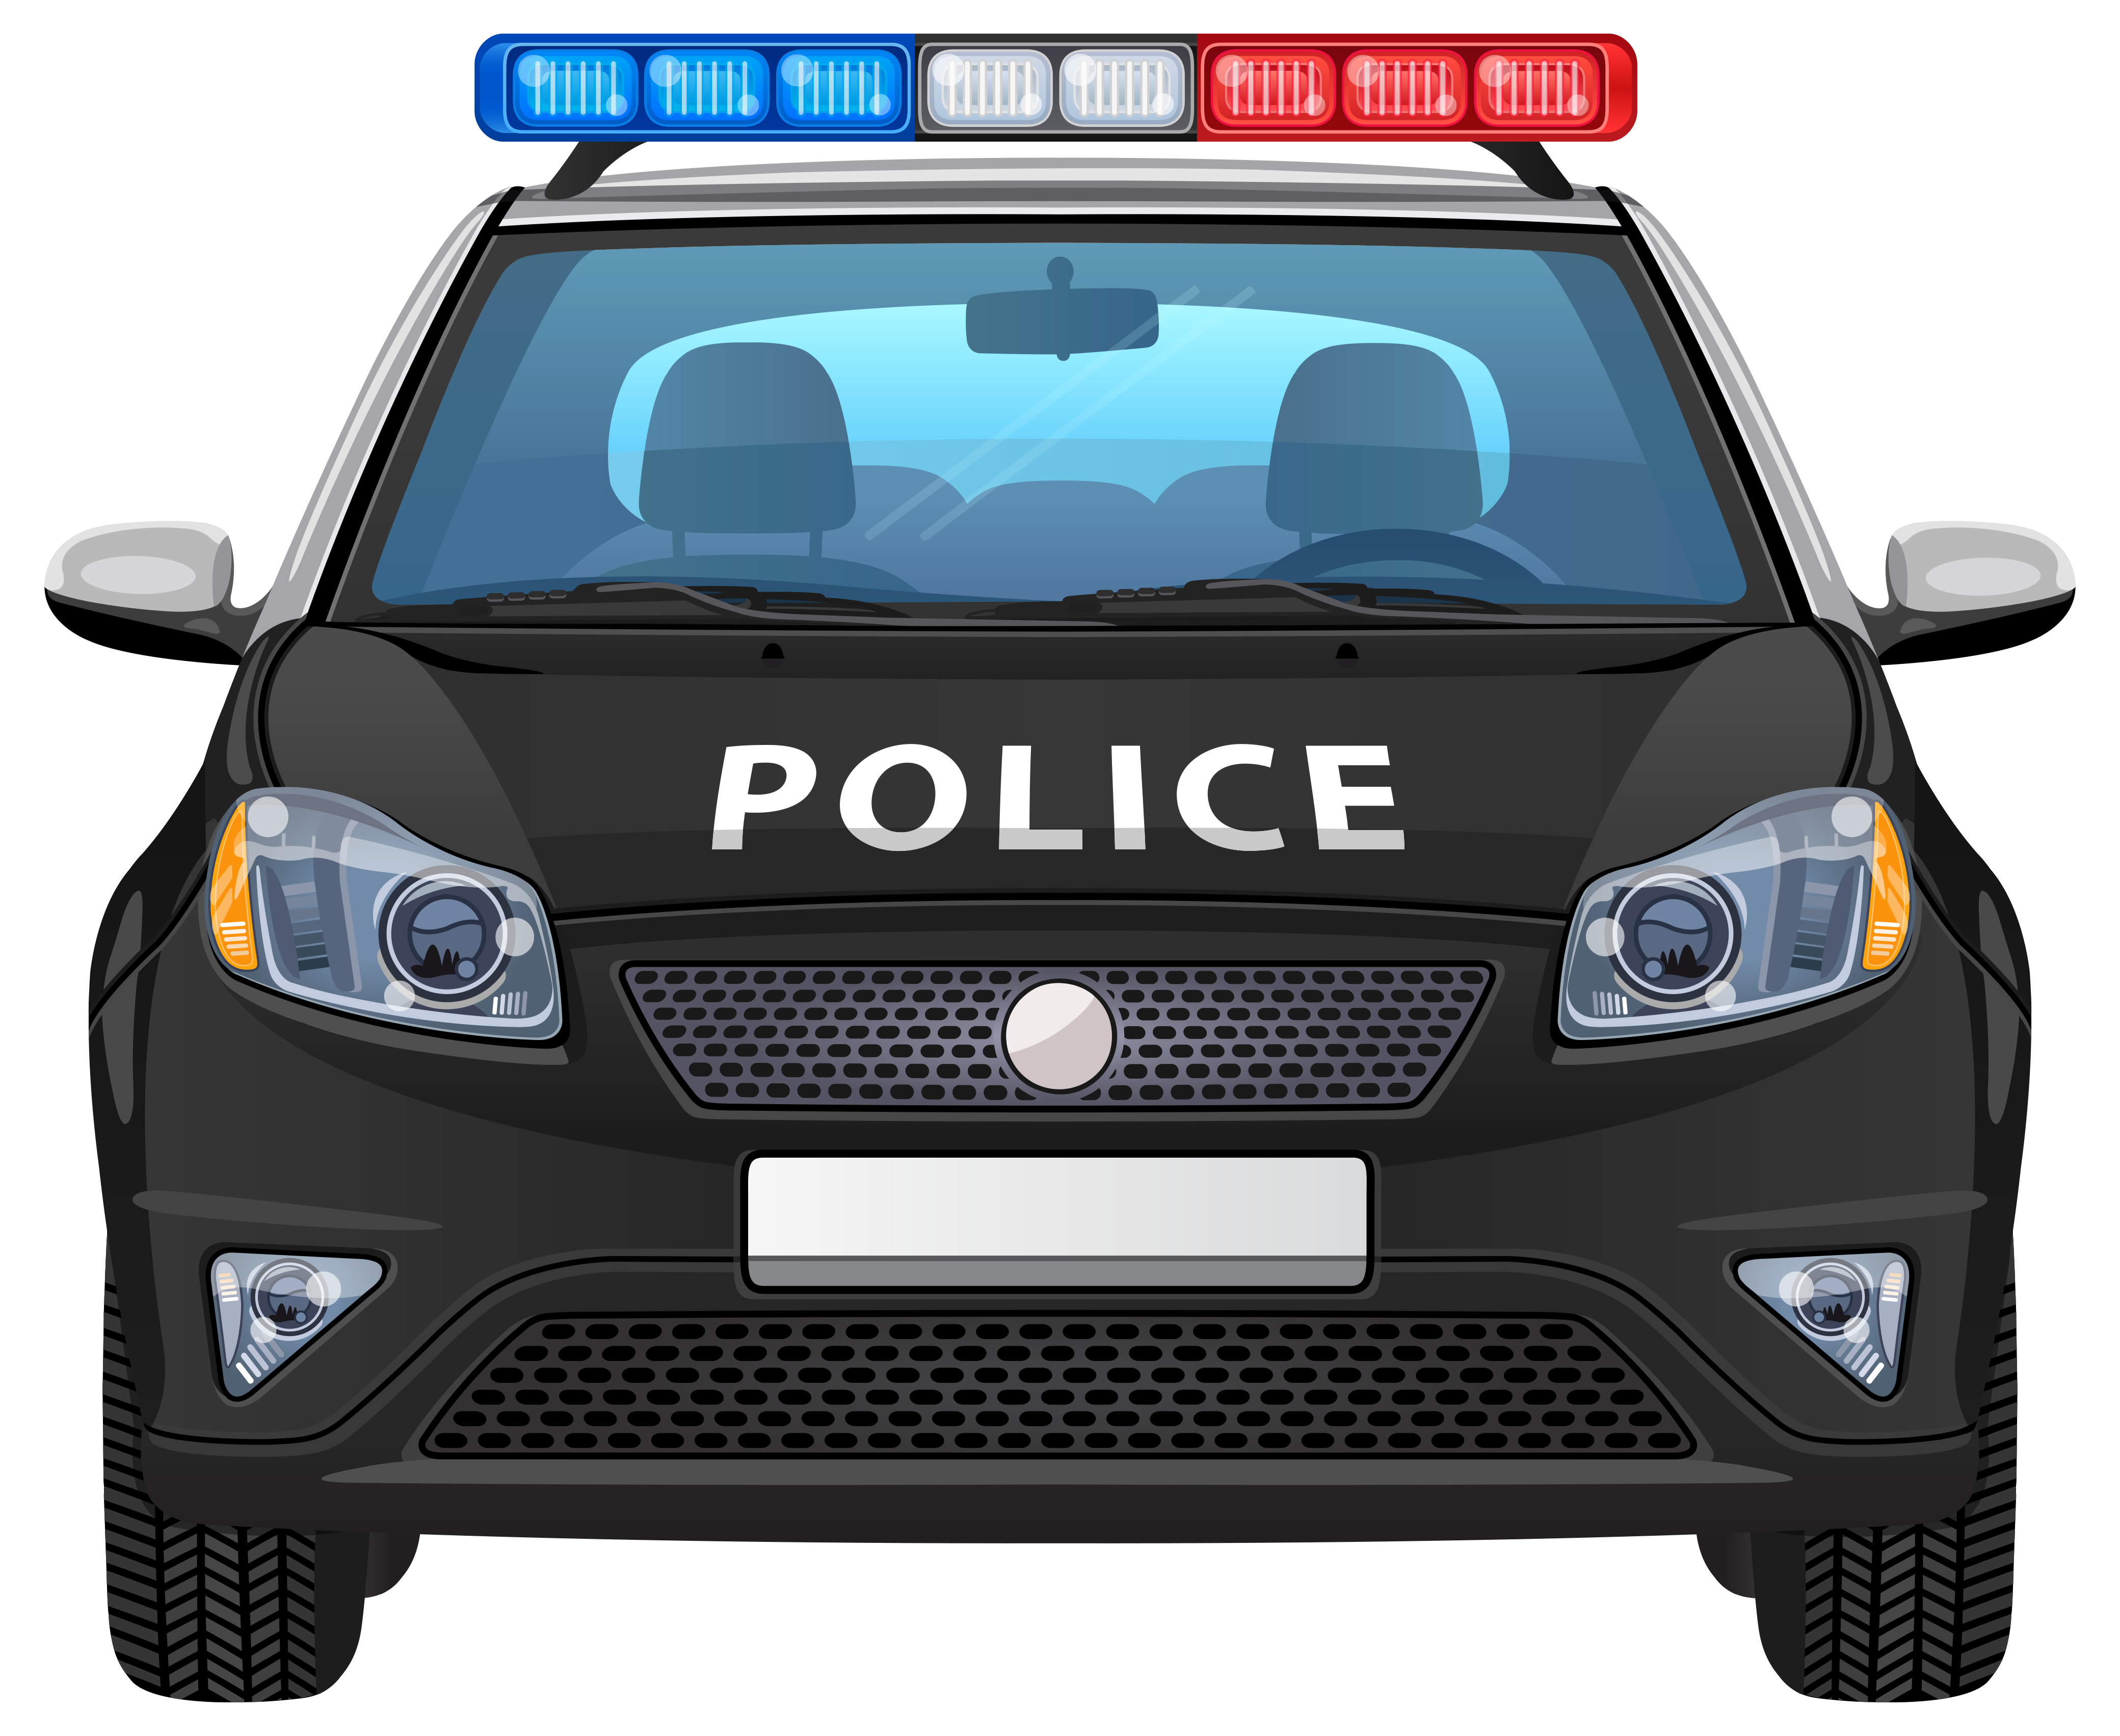 Police Car Image Free Download Clipart